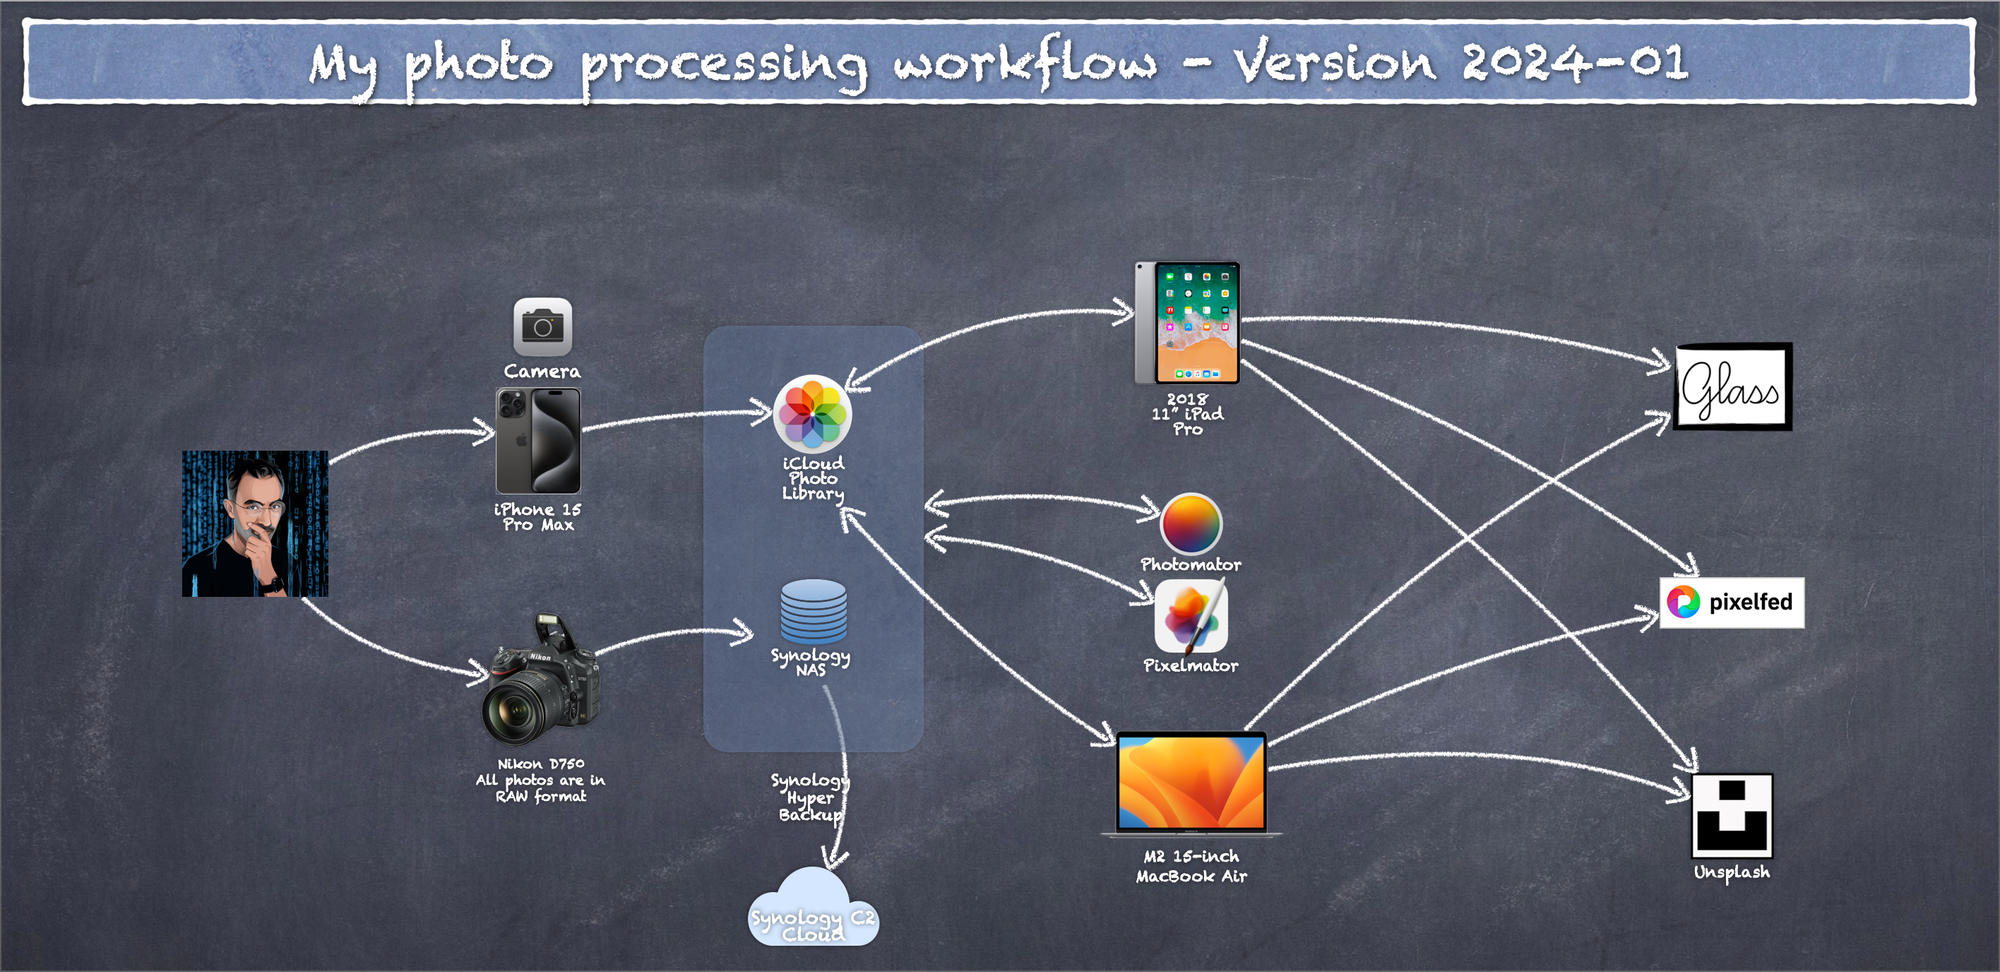 My updated and simplified photo processing workflow as of 2024-01